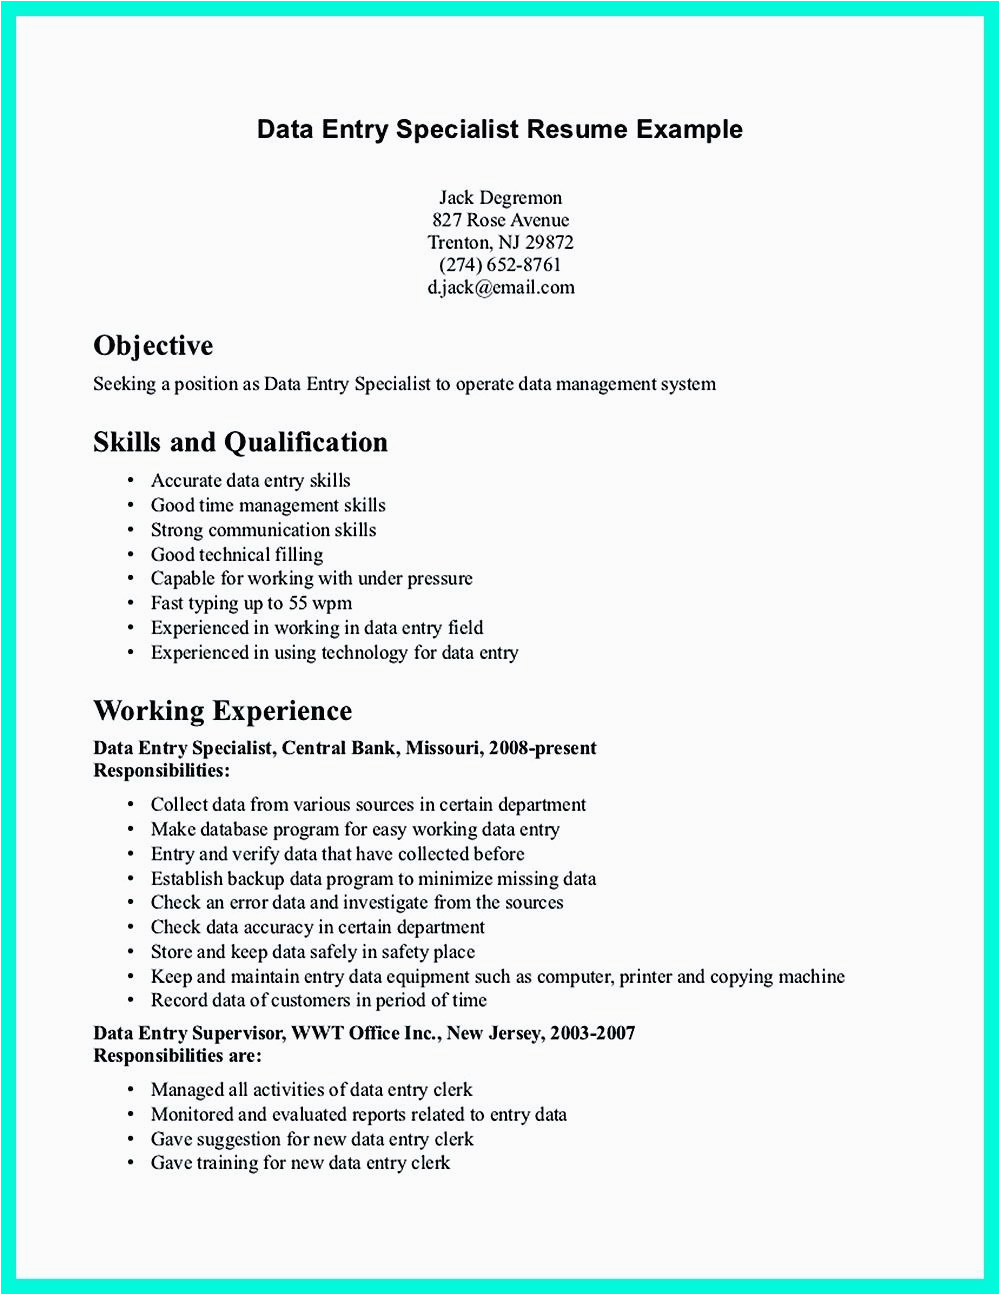 Data Entry Resume Sample with No Experience Pdf Your Data Entry Resume is the Essential Marketing Key to